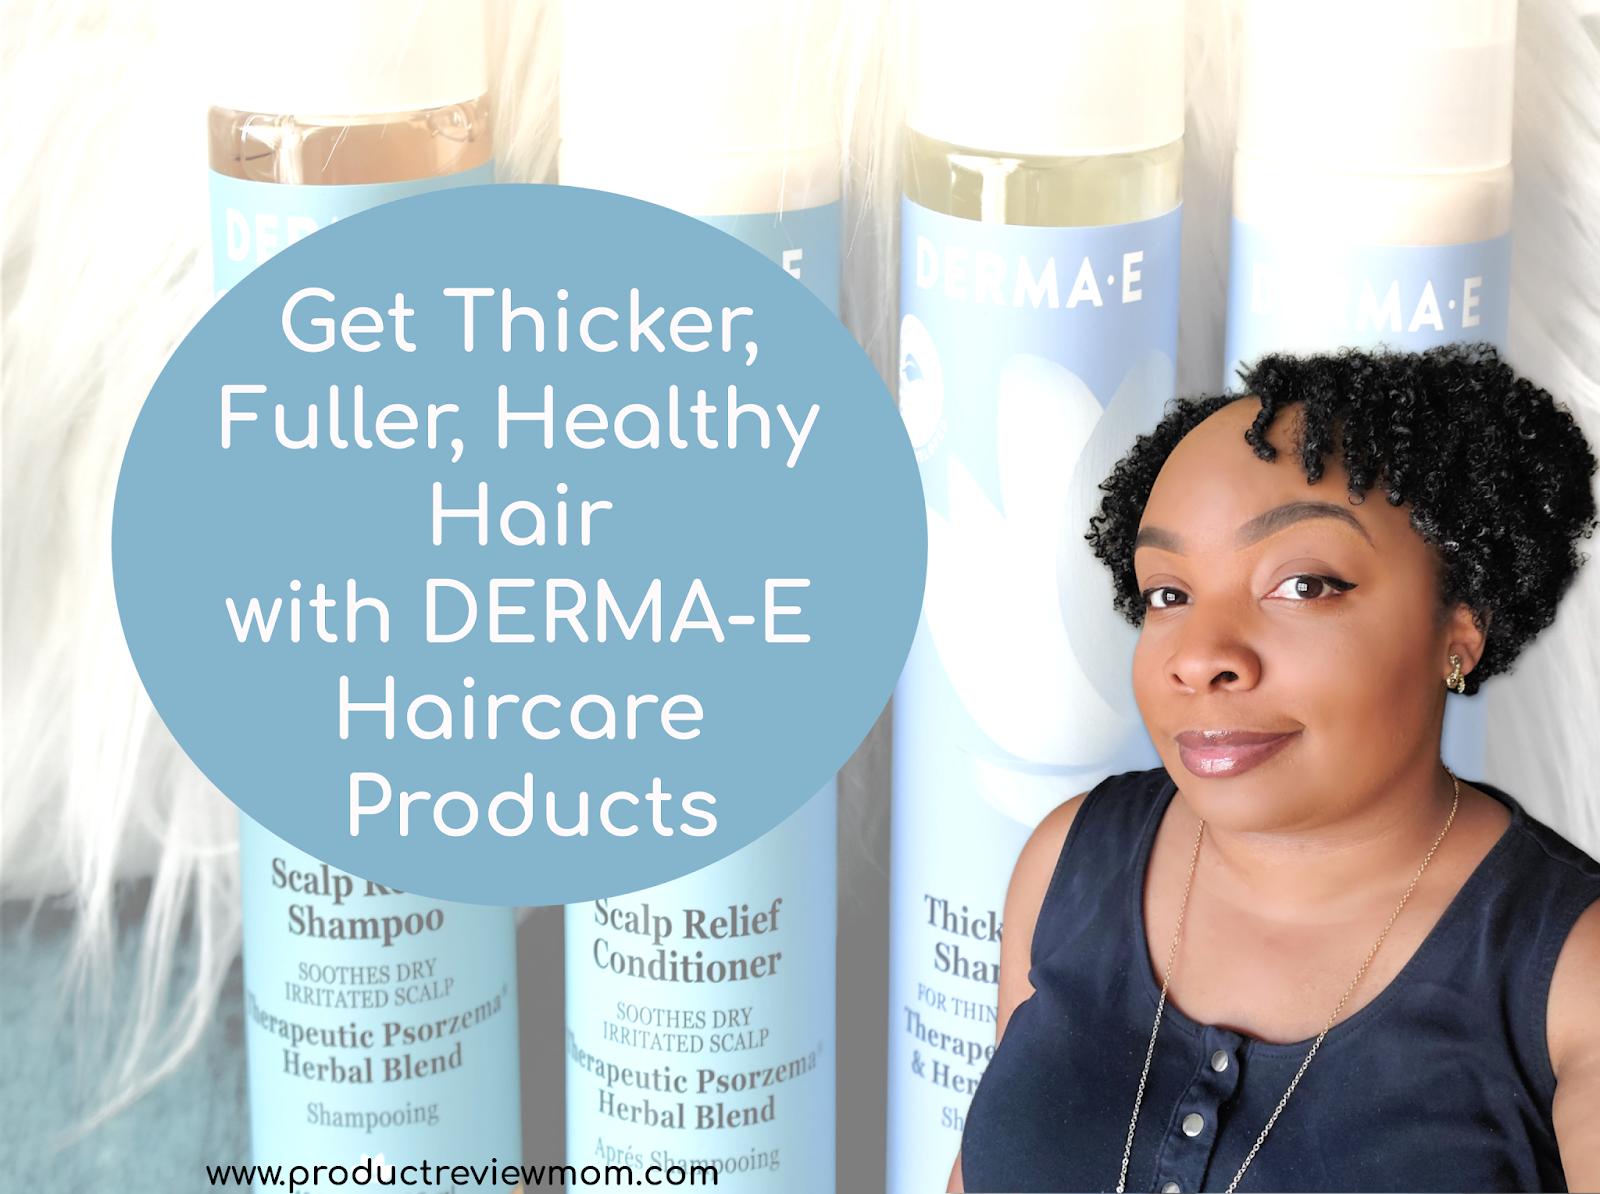 Get Thicker, Fuller, Healthy Hair with DERMA-E Haircare Products